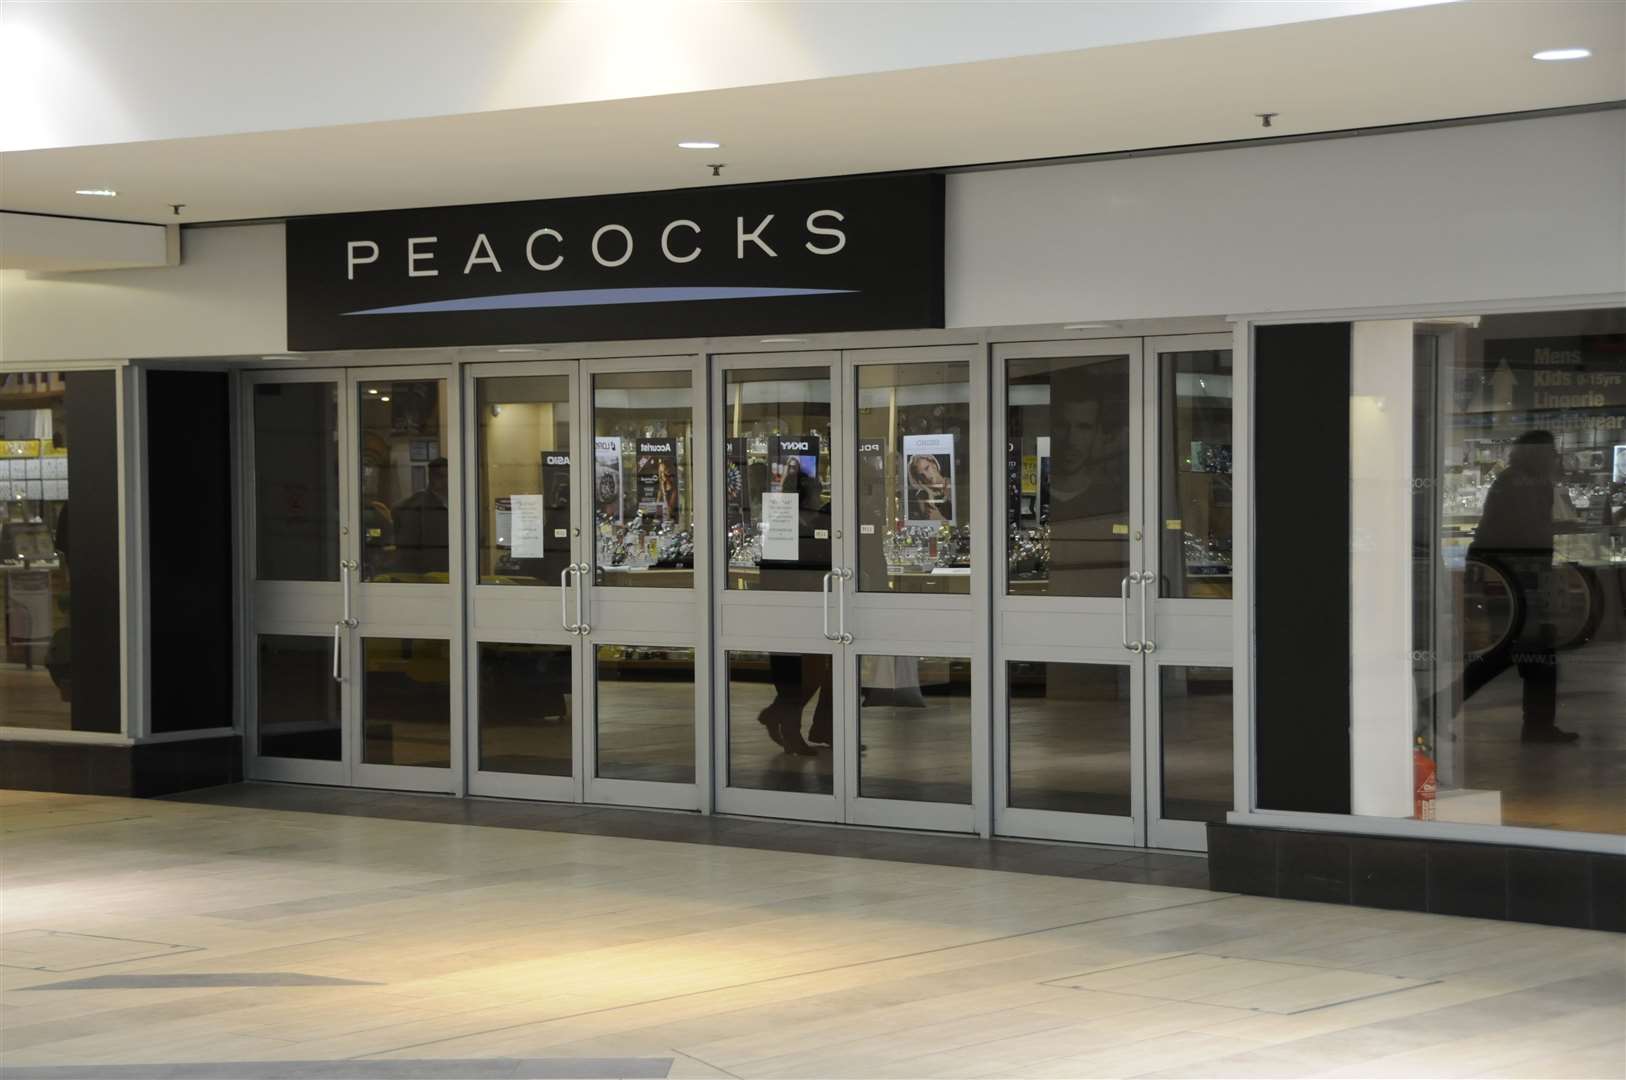 The former Peacocks store in Ashford - it has since been moved to within the Dobbies store